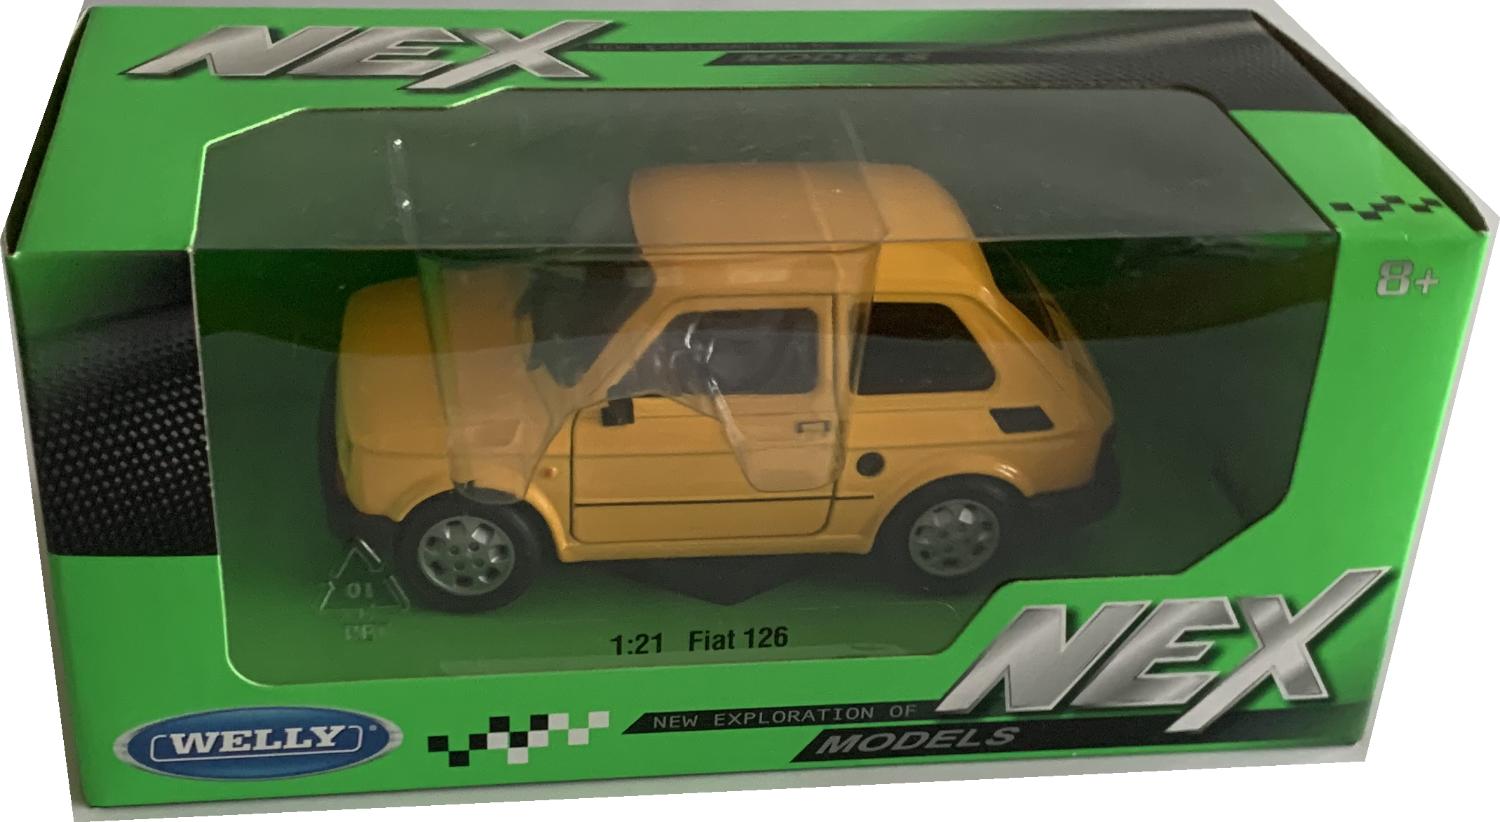 The model is  presented in a window display box, the car is approx. 14 cm long and the presentation box is 23 cm long